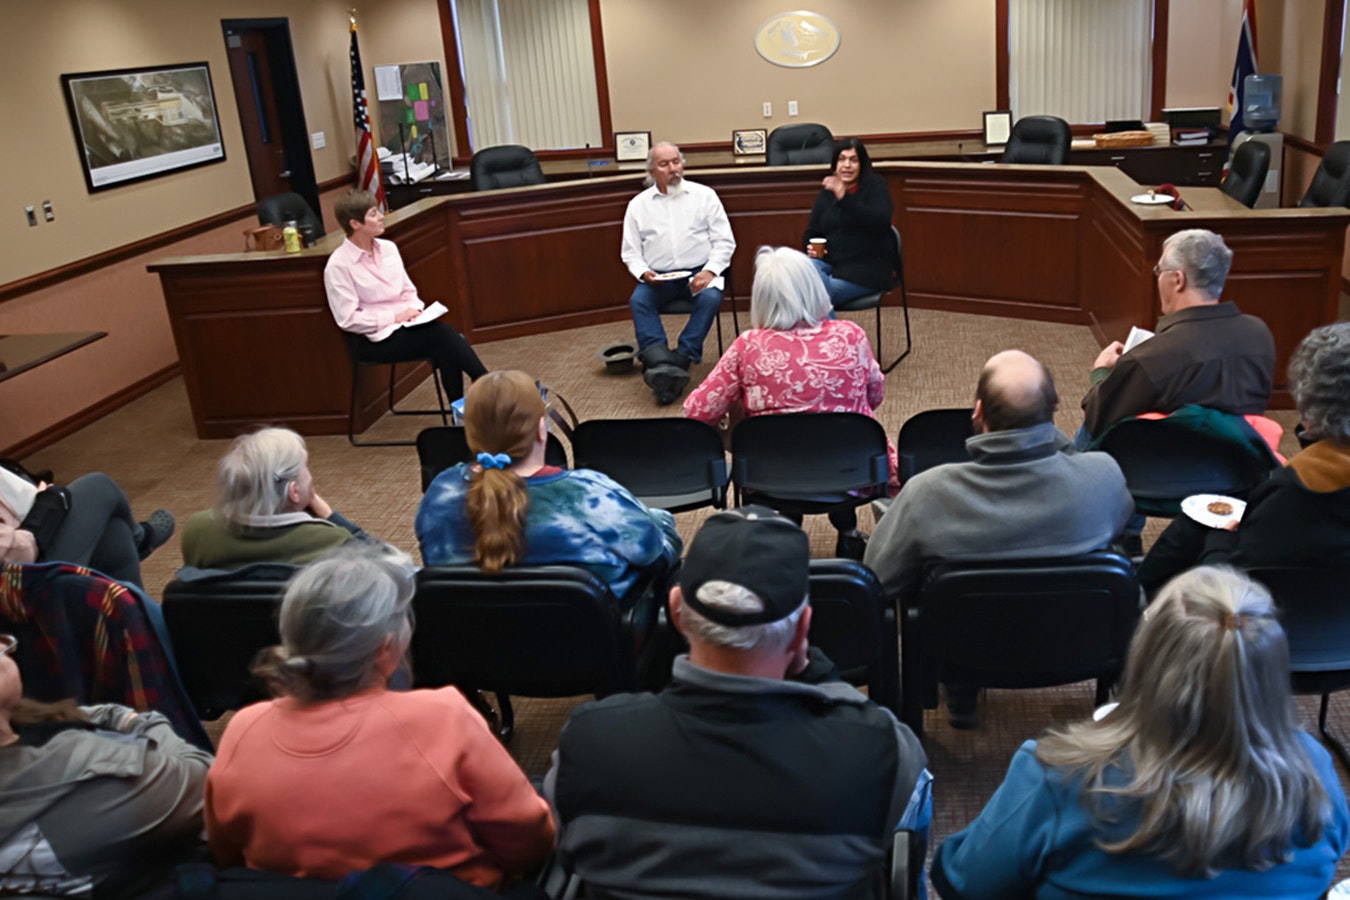 Democrats Sergio Maldonado and former state Rep. Andi LeBeau Clifford were the featured speakers for a political discussion attended by Hot Springs County Democrats and Republicans.